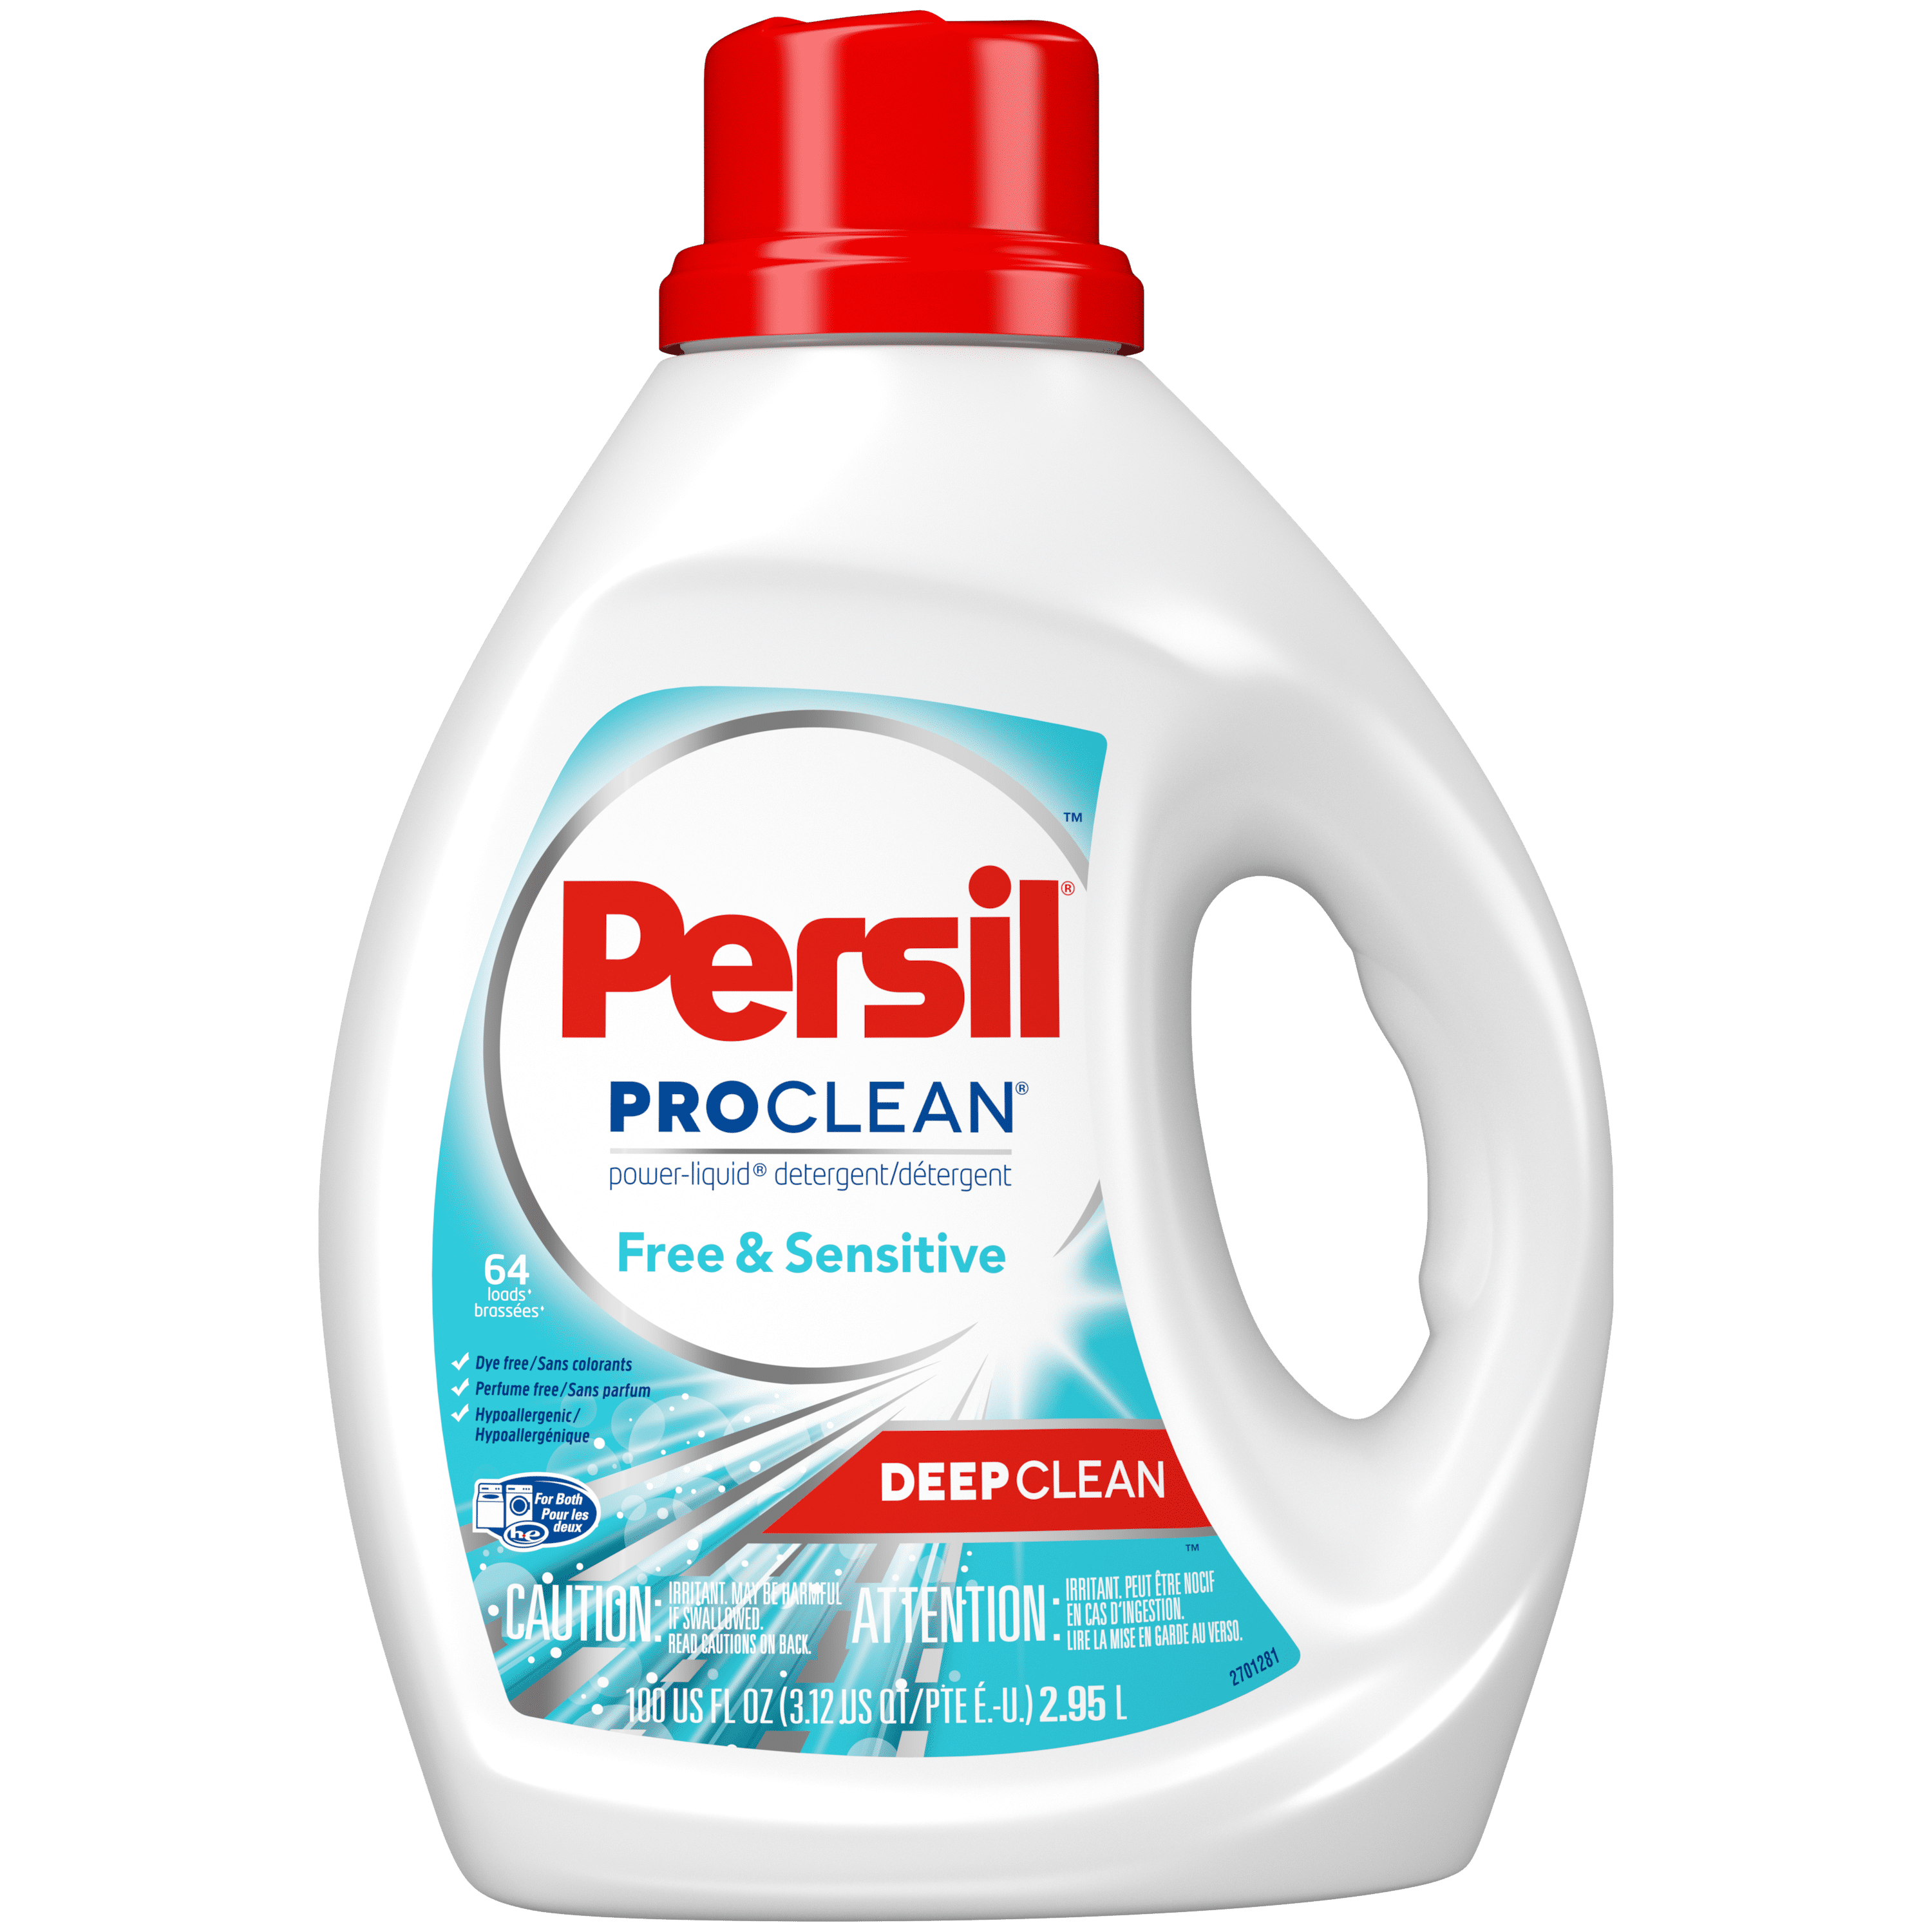 Persil Laundry Detergent Liquid, and Unscented and Hypoallergenic for Skin, 100 Fluid Ounces, 64 Loads - Walmart.com